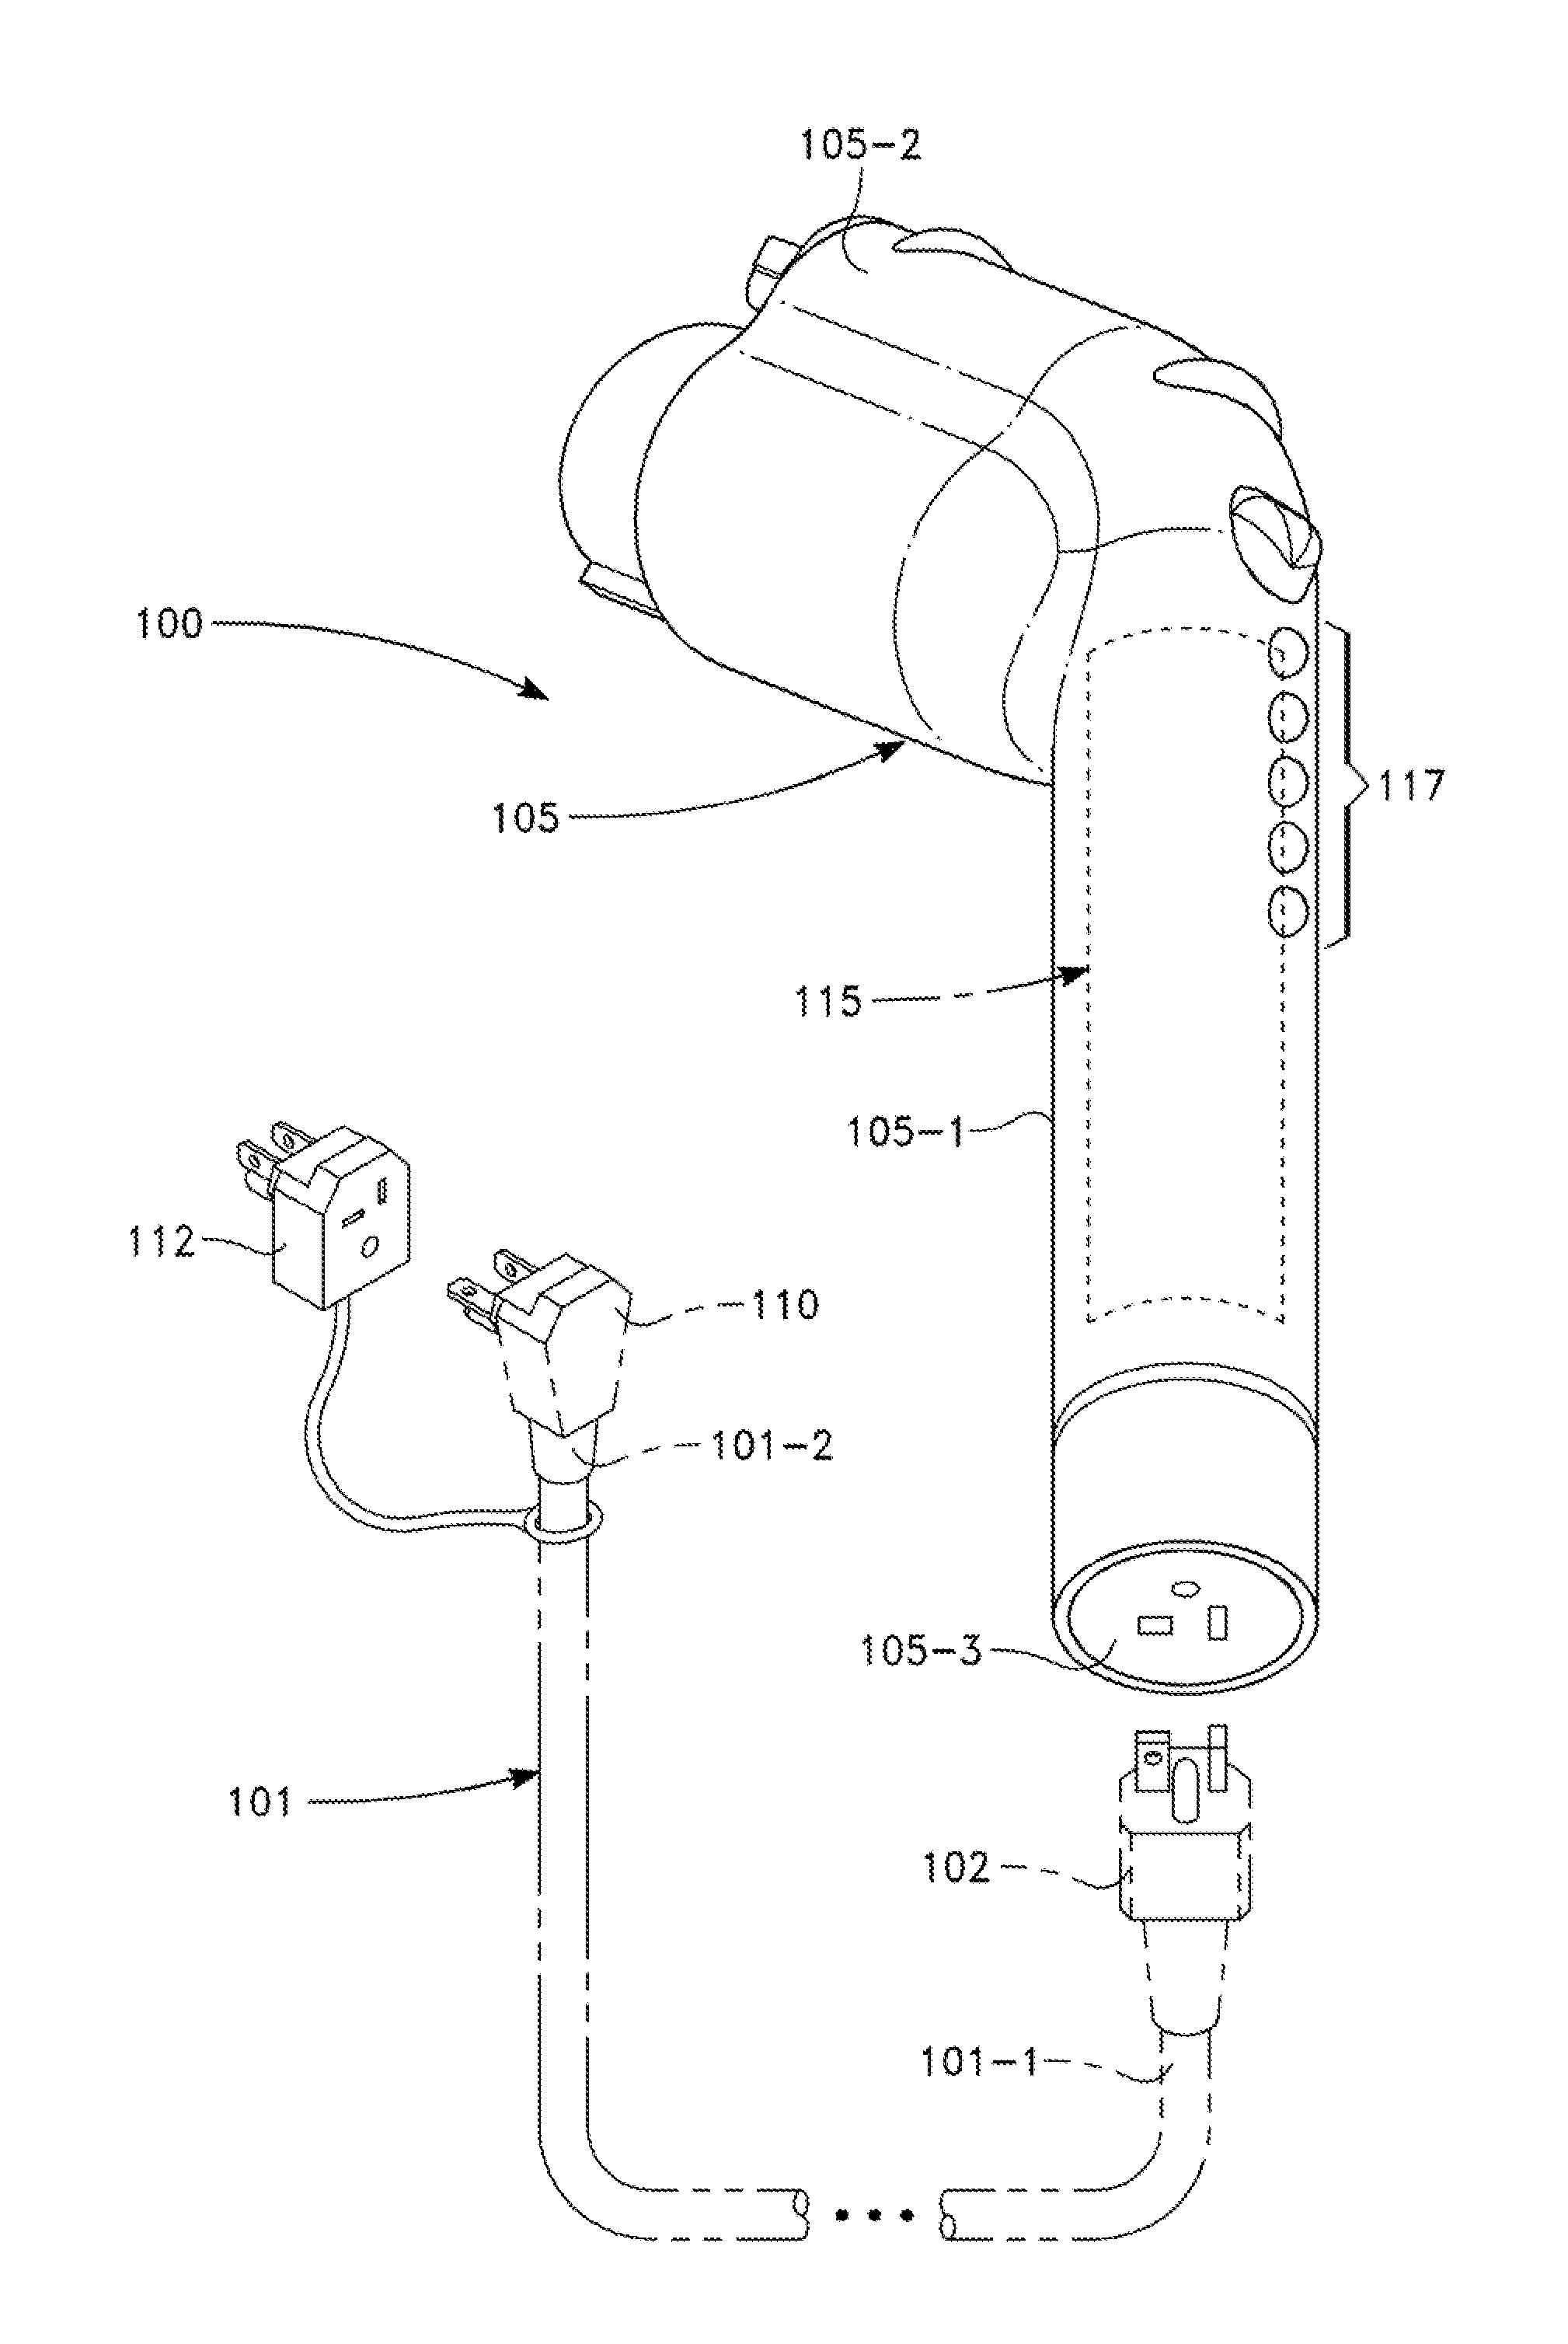 Electric vehicle docking connector with embedded evse controller